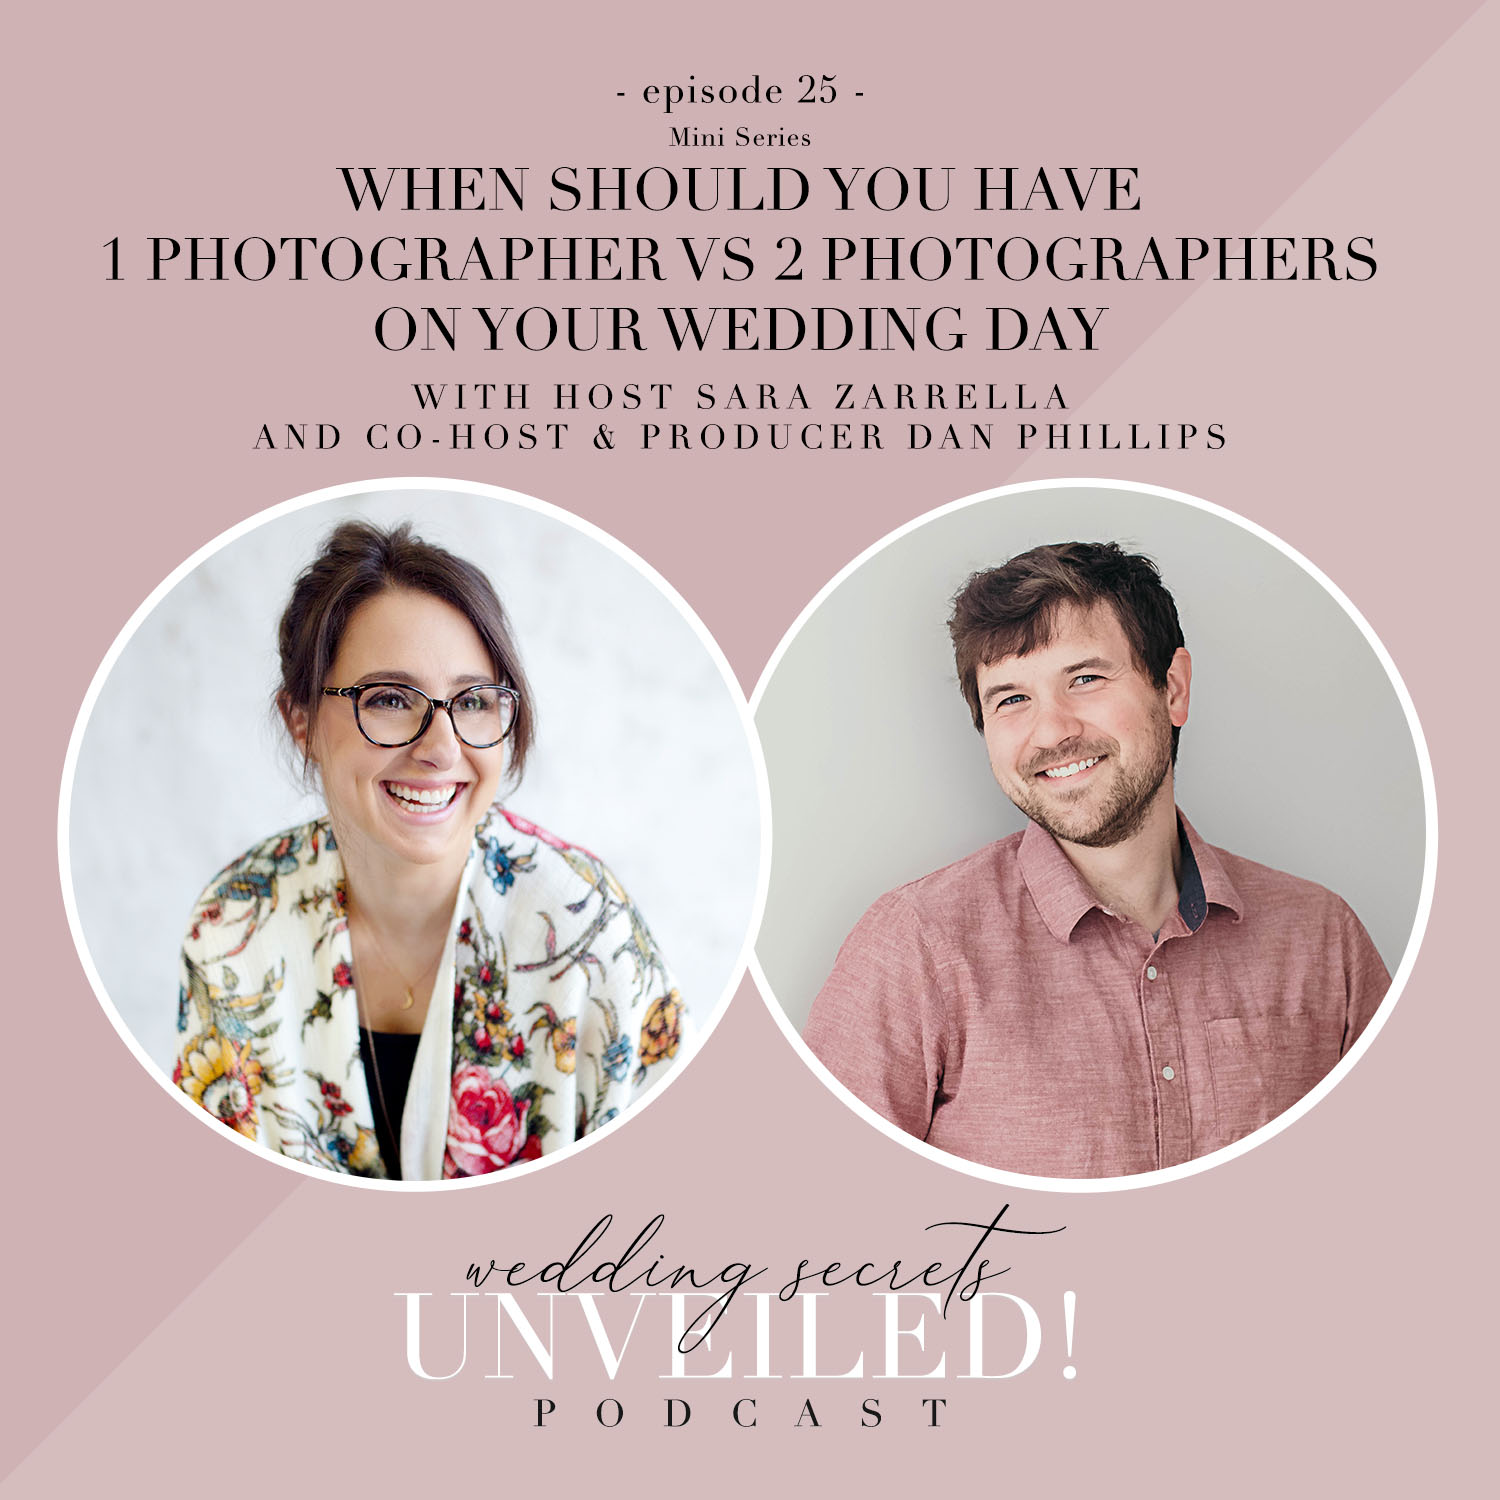 When You Should Have 1 Photographer vs 2 Photographers on your wedding day: a Mini-series on Wedding Secrets Unveiled! podcast